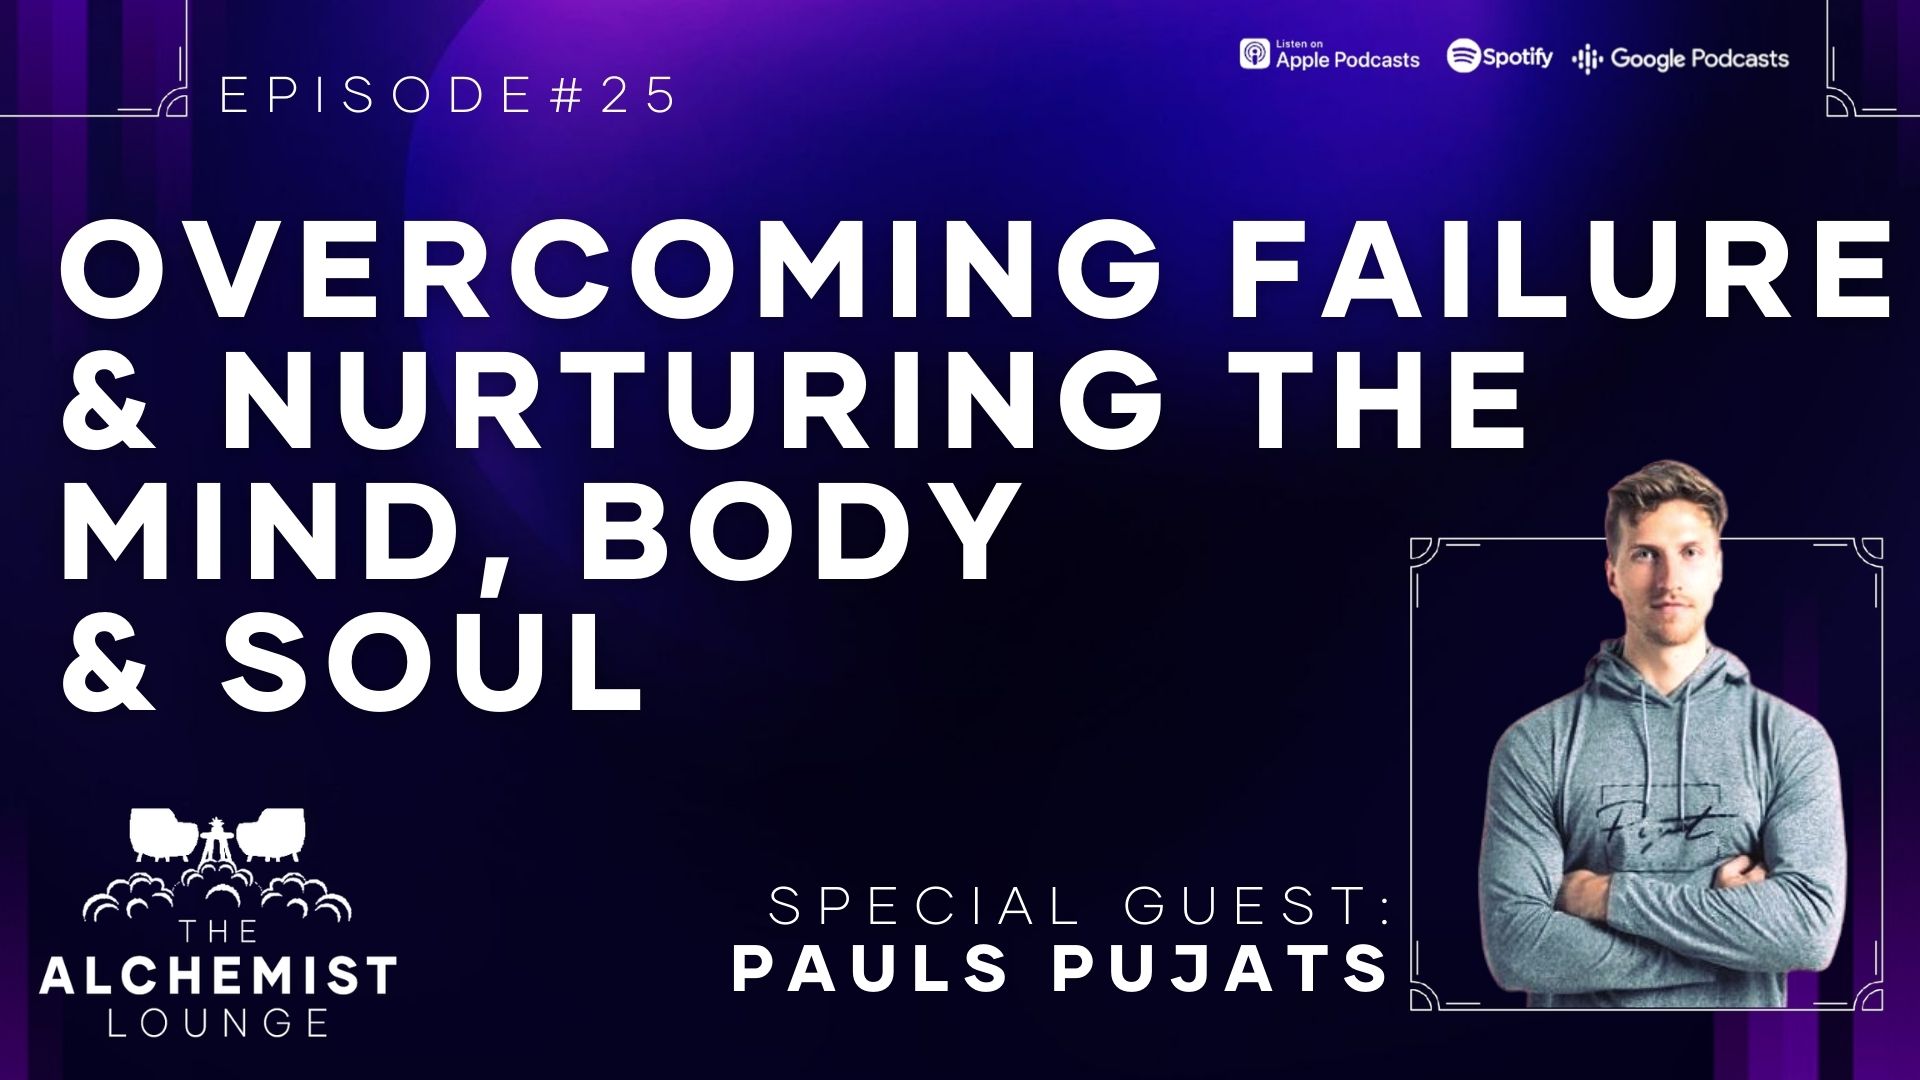 Overcoming Failures And Winning In Life - Pauls Pujats